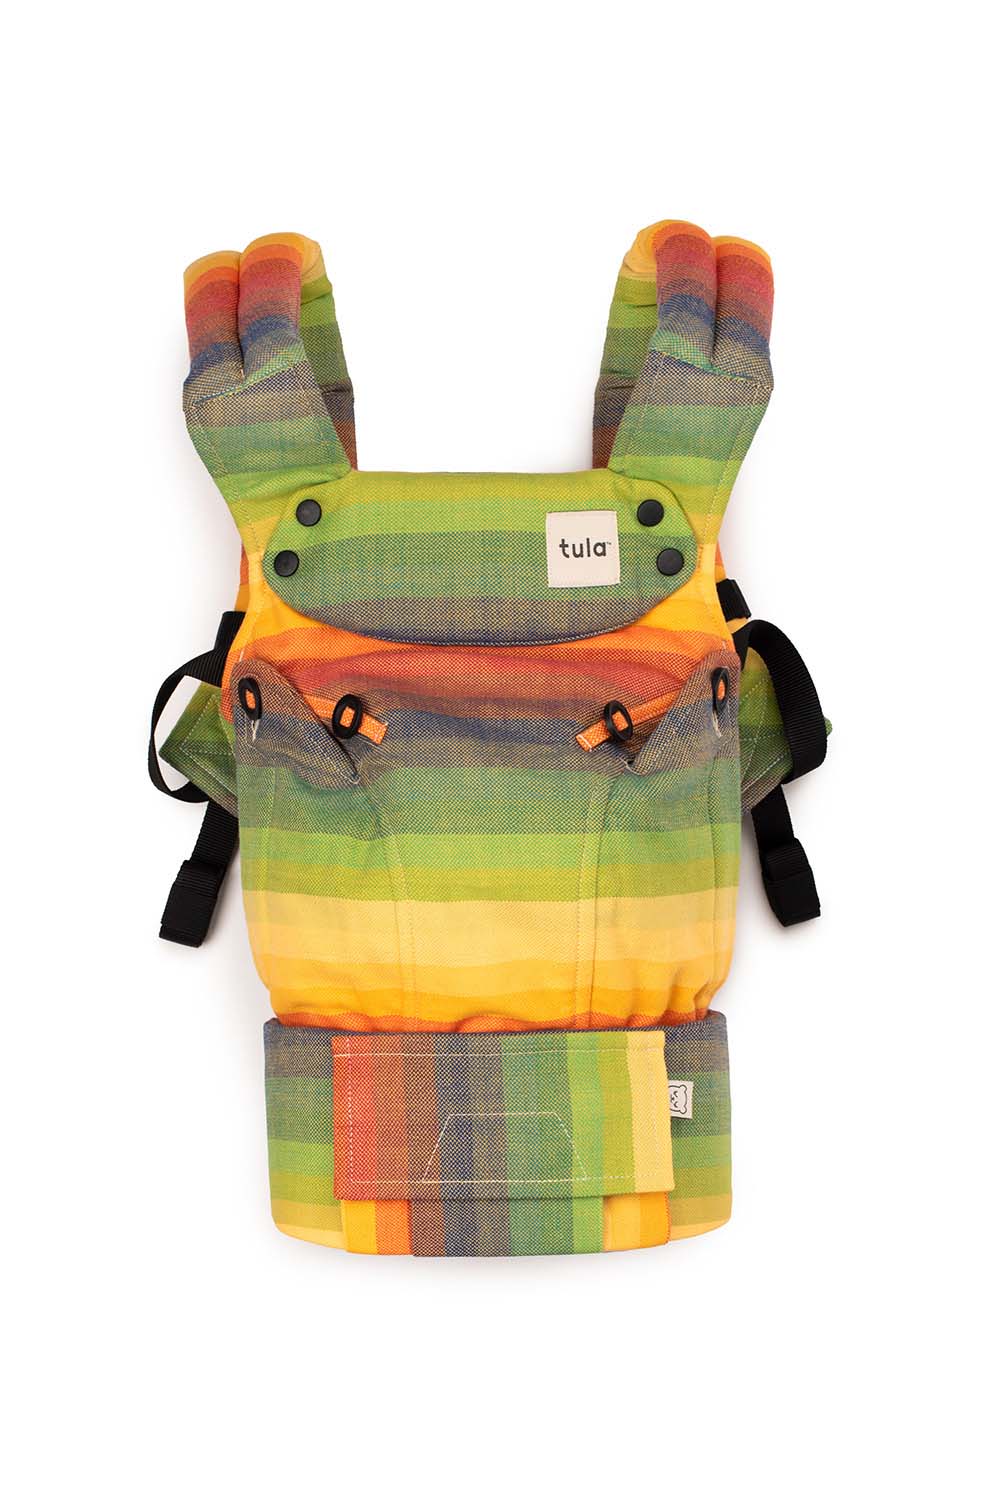 I Missed You - Signature Handwoven Explore Baby Carrier